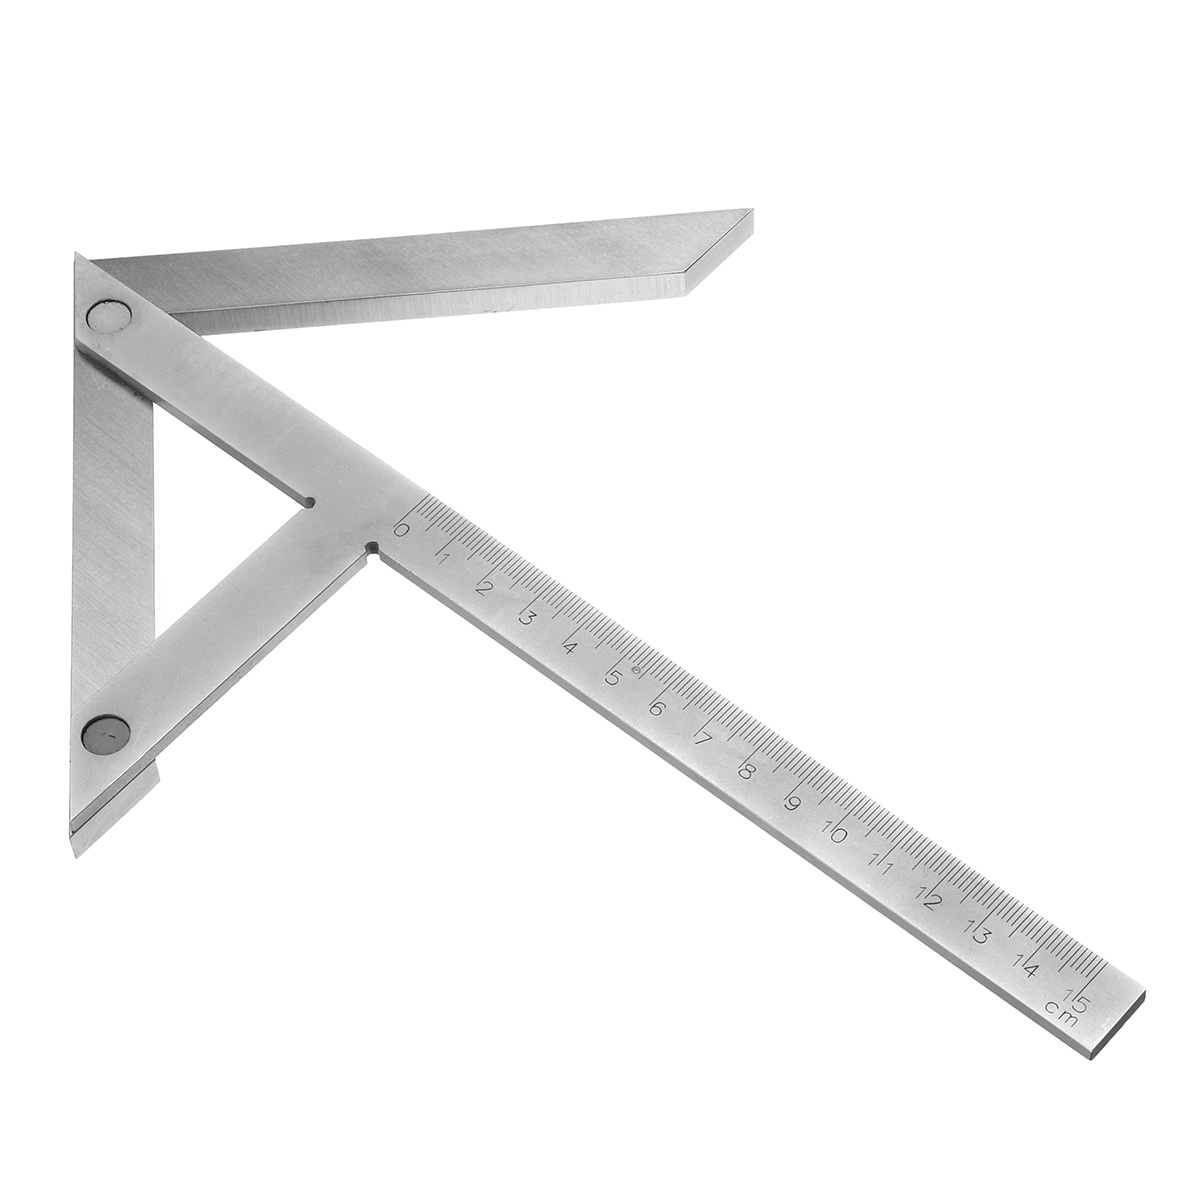 150x130mm-Precision-Center-Centering-Square-Gauge-Guaging-Round-Bar-Marking-Finder-Tool-1302764